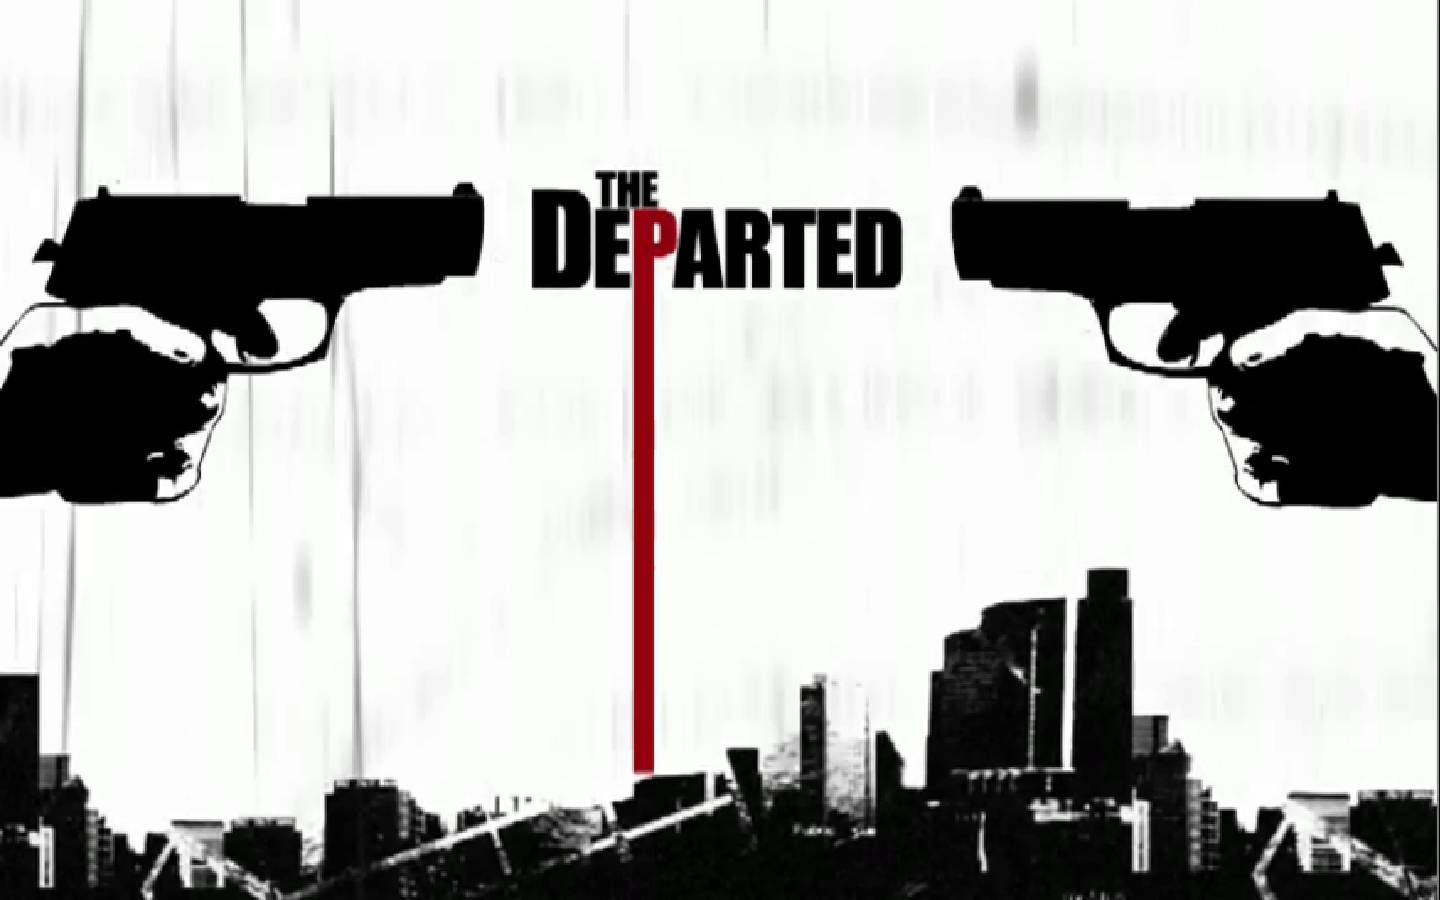 Download The Departed Film Poster Wallpaper 